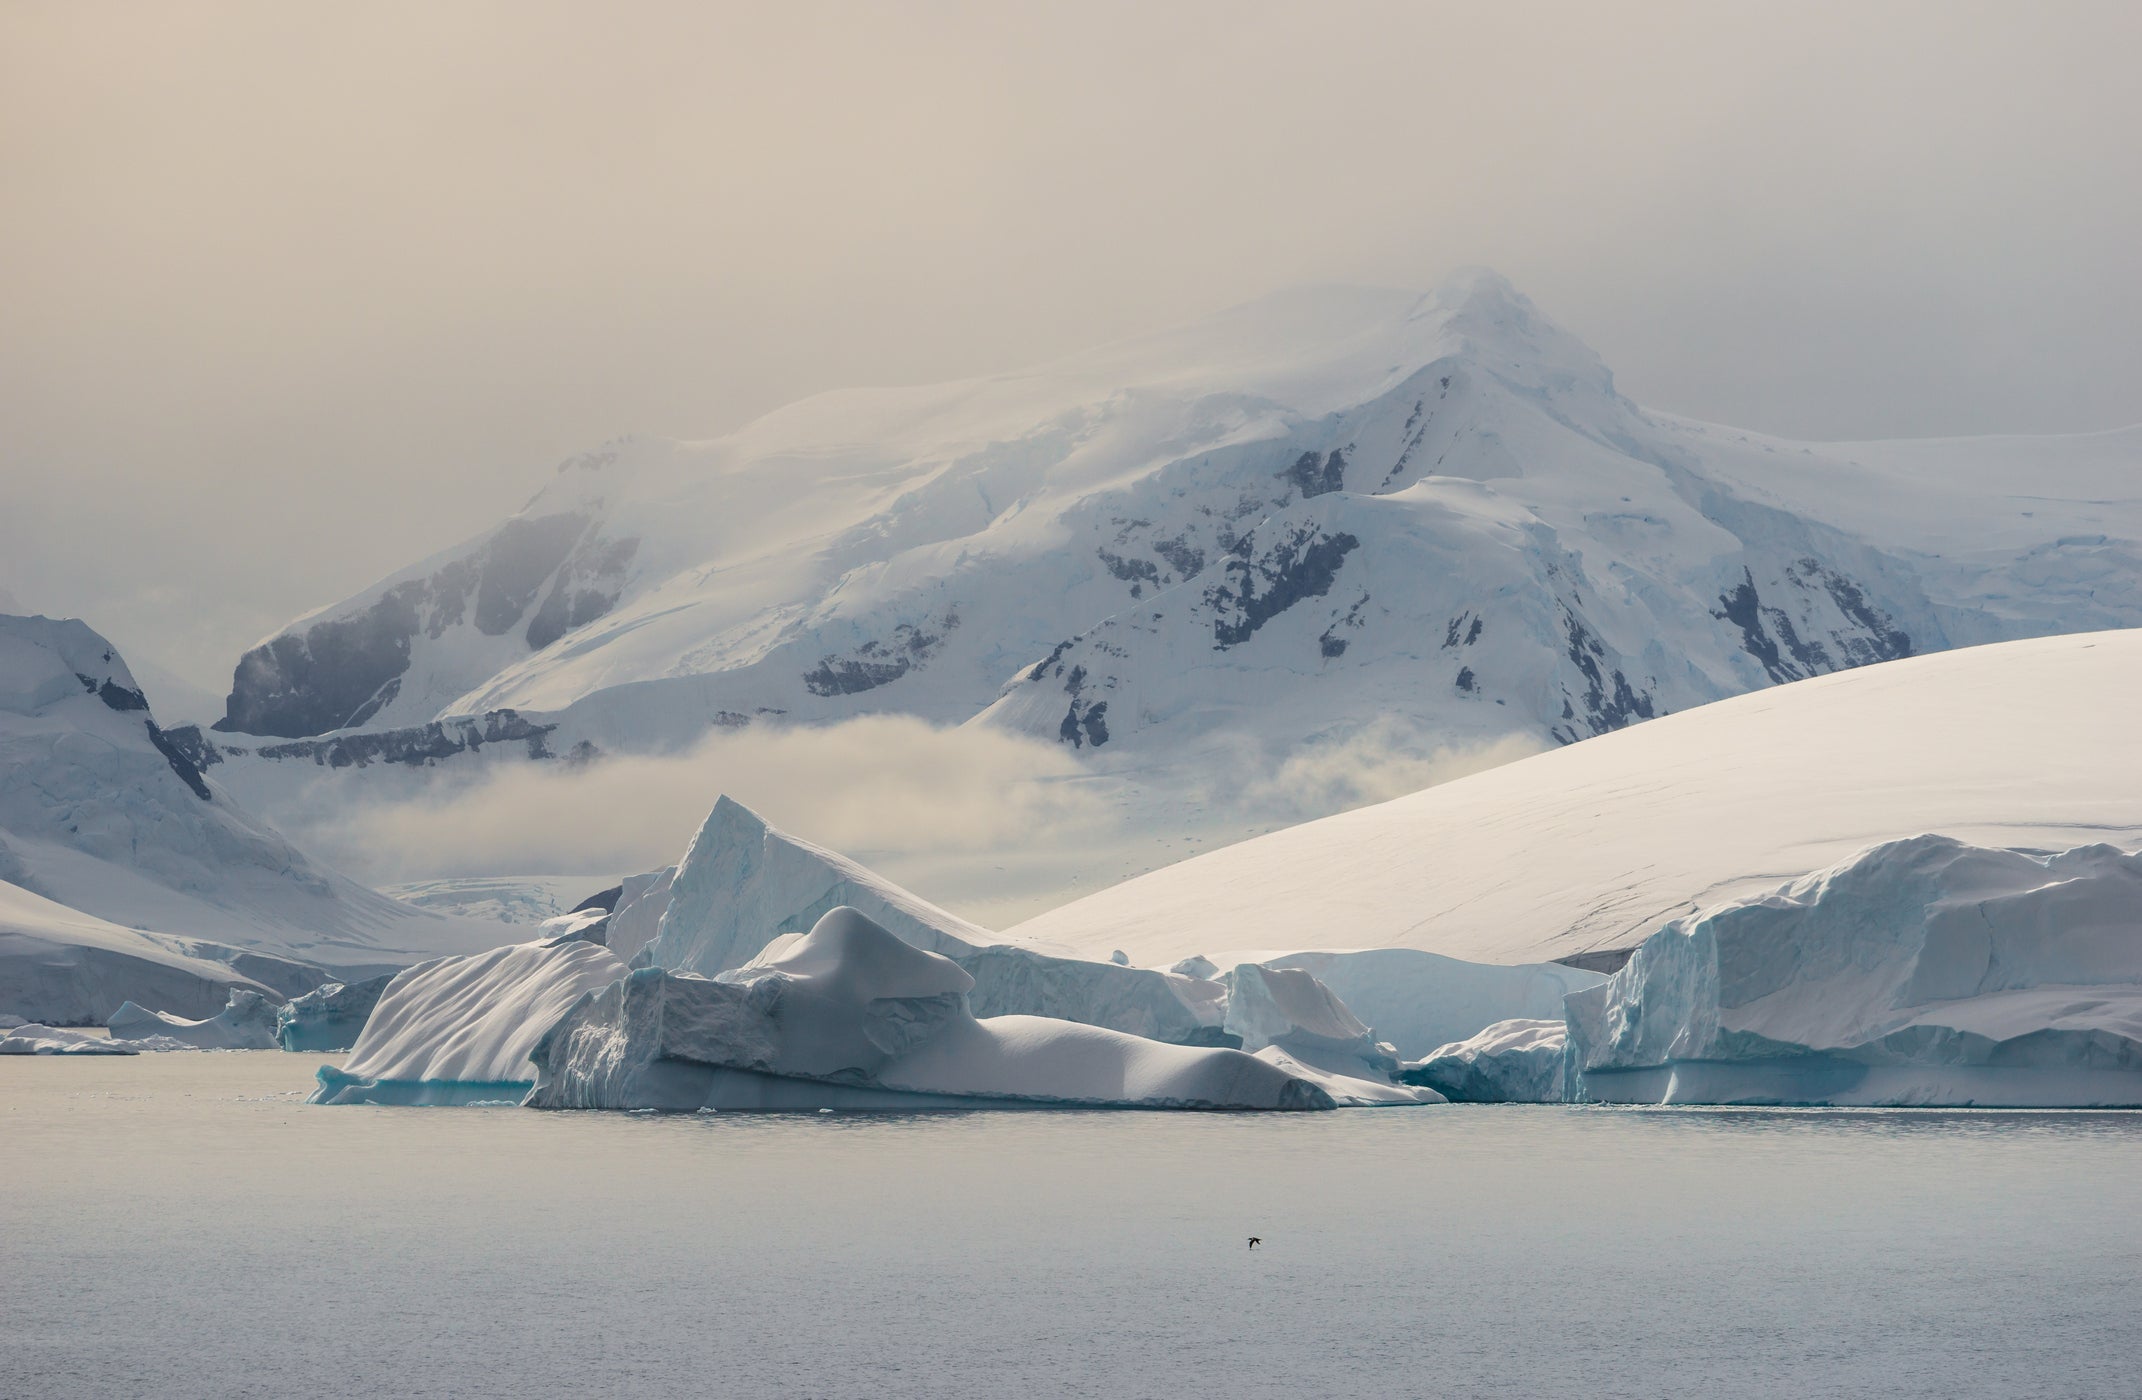 Antarctica: the coldest place on earth?